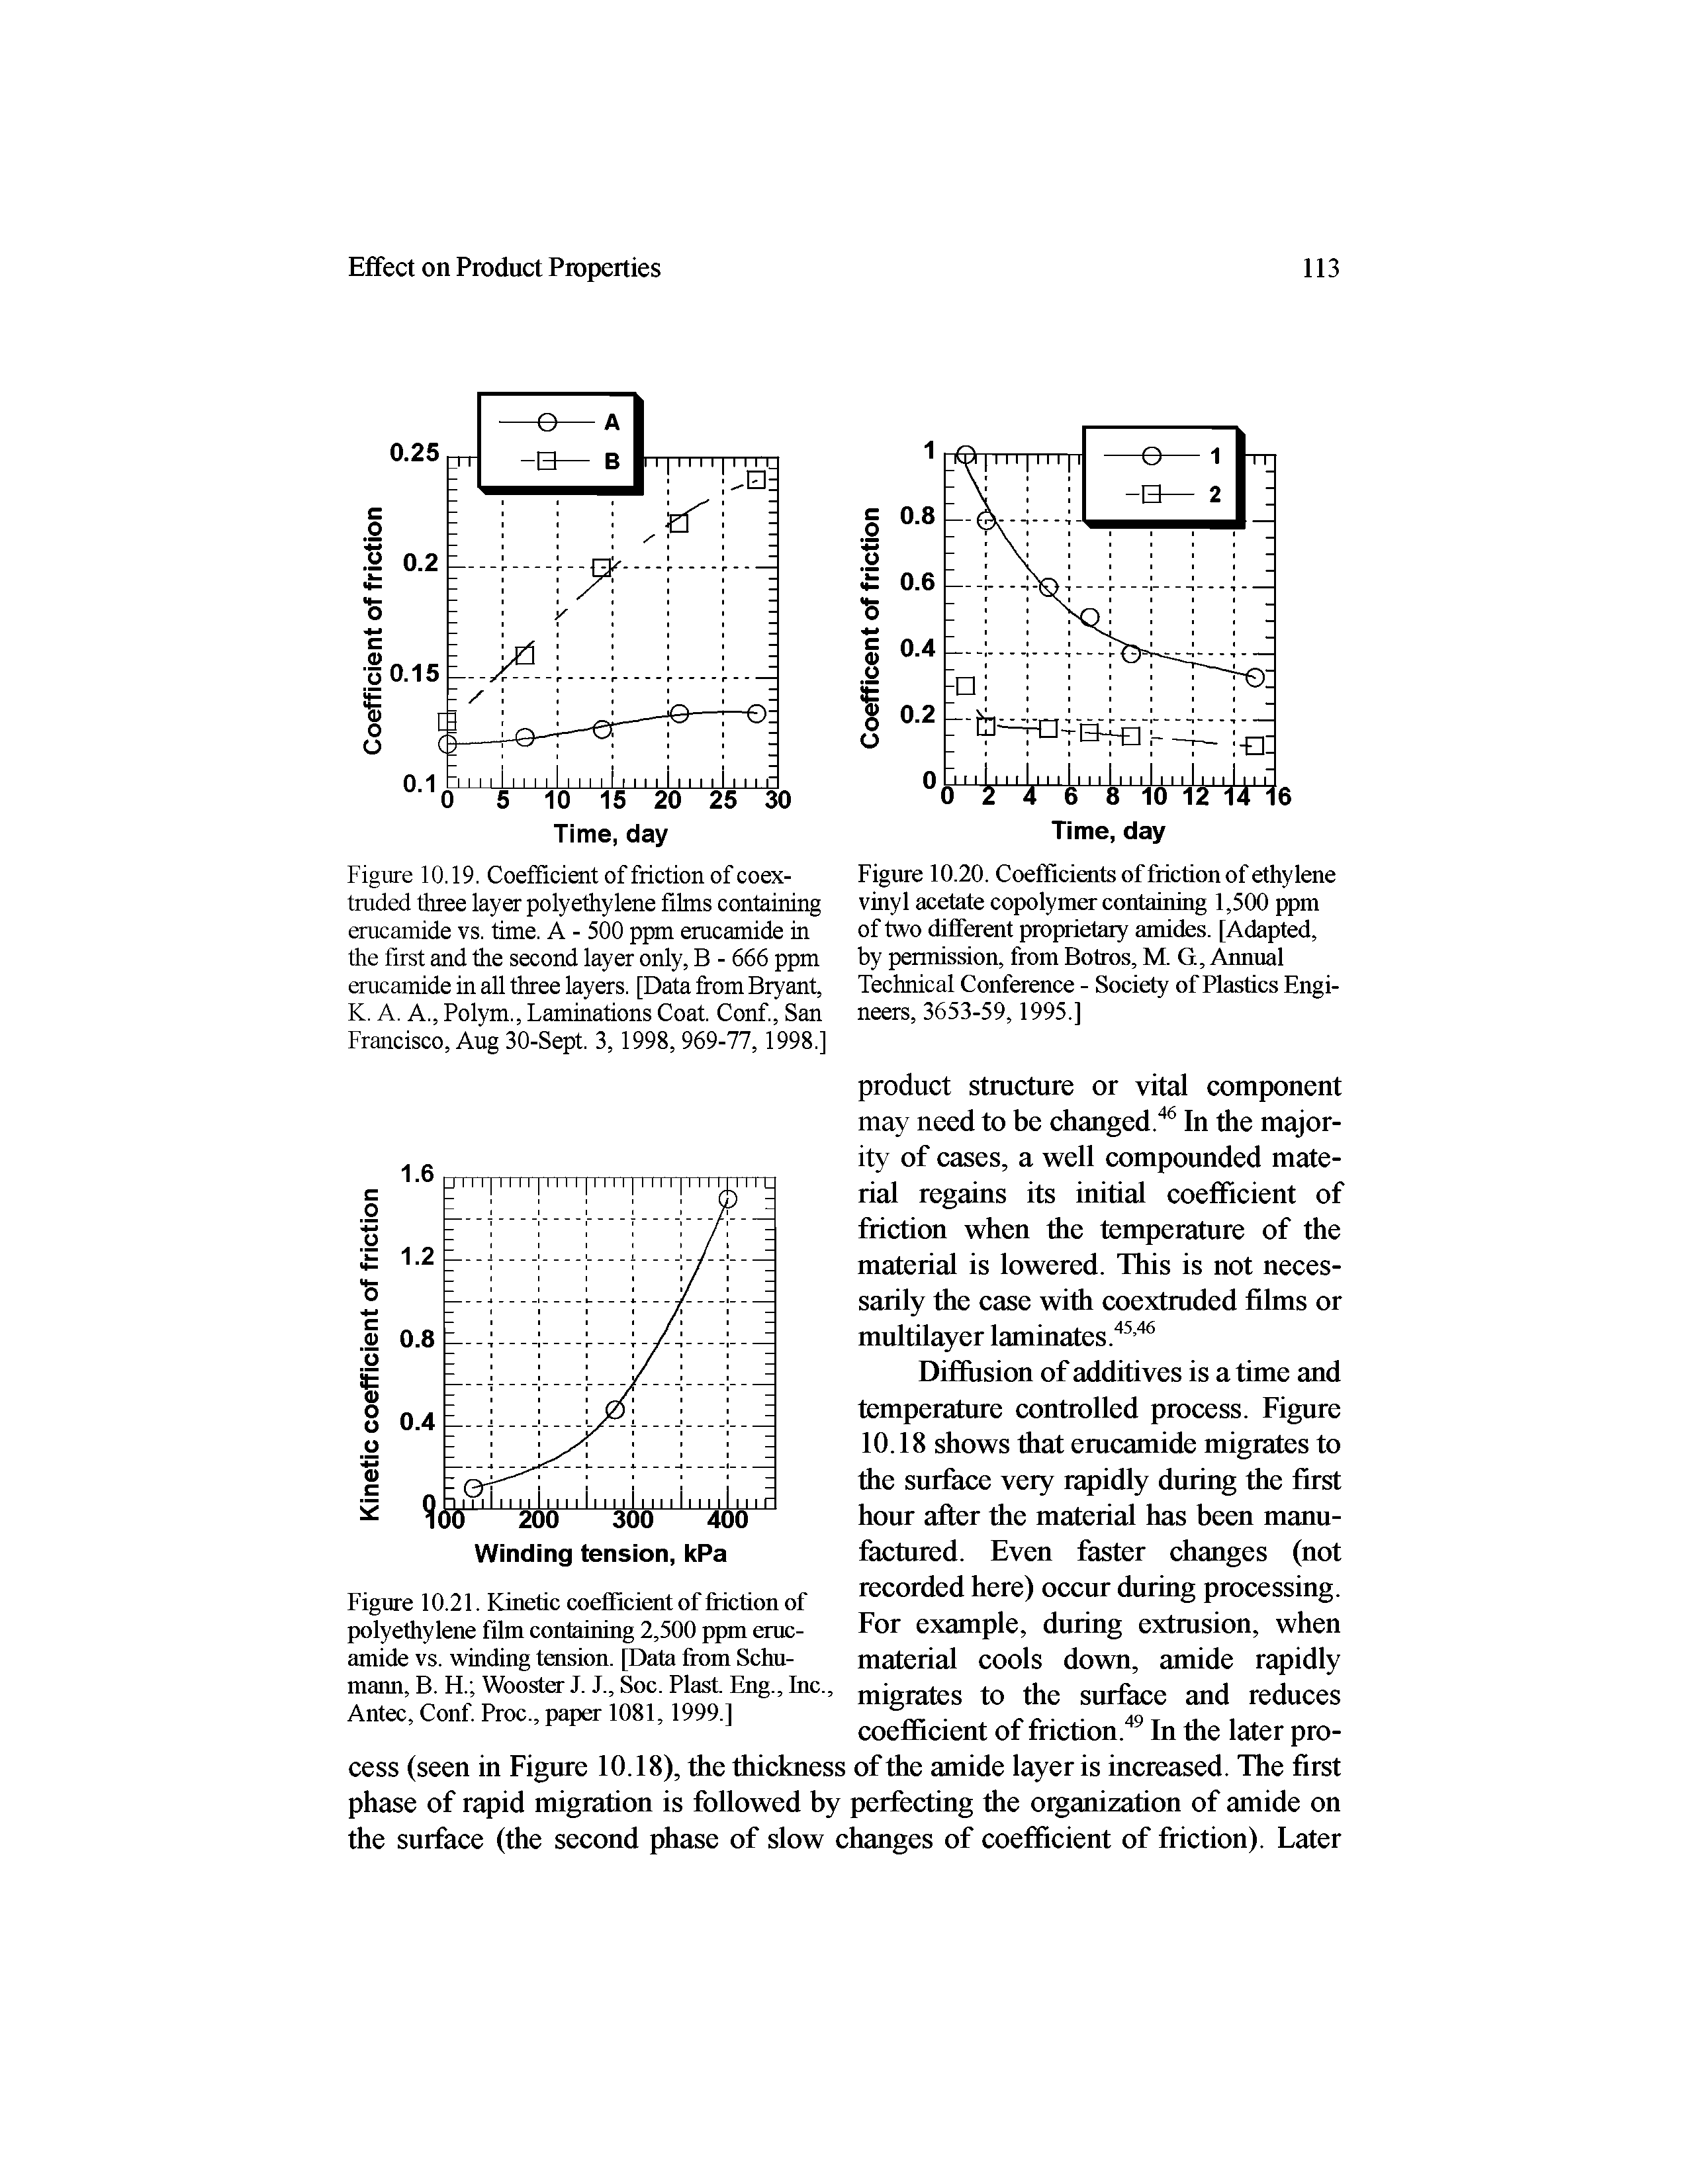 Figure 10.19. Coefficient of friction of coex-tmded three layer polyethylene films containing emcamide vs. time. A - 500 ppm emcamide in the first and the second layer only, B - 666 ppm emcamide in all three layers. [Data from Bryant, K. A. A., Polym., Laminations Coat. Conf, San Francisco, Aug 30-Sept. 3,1998, 969-77,1998.]...